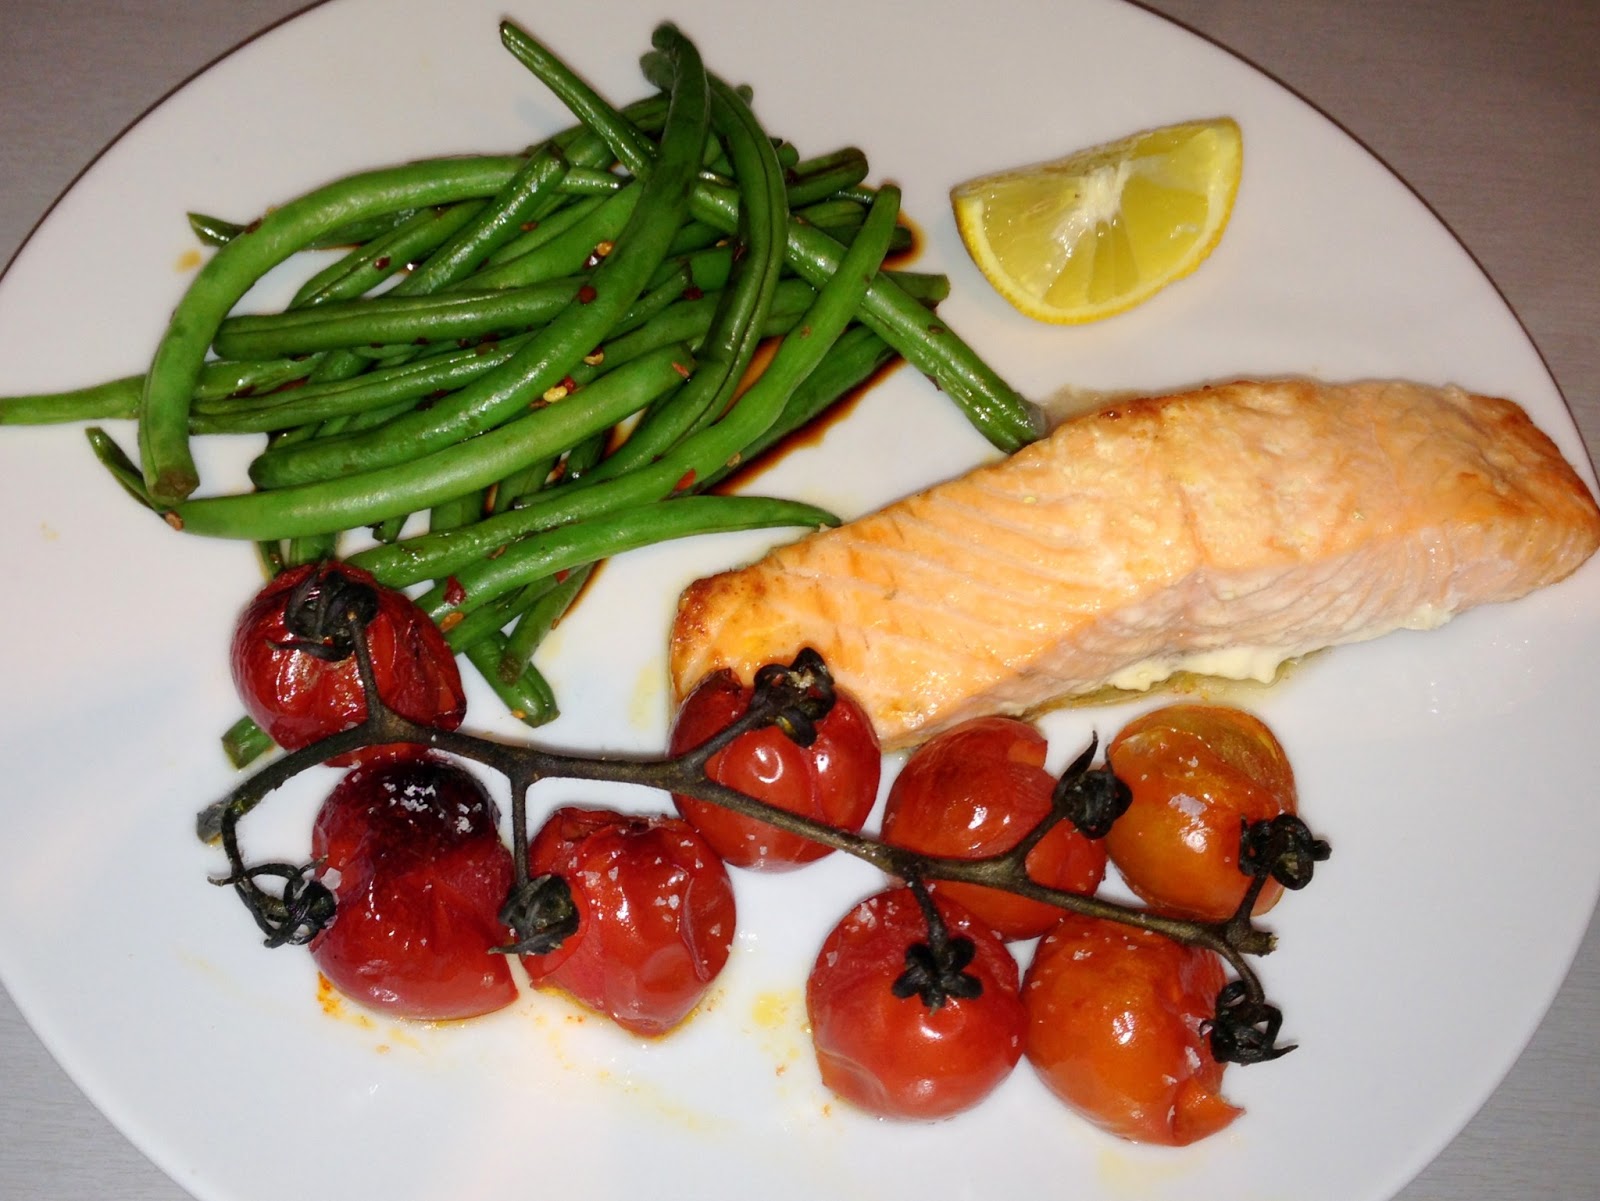 Baked salmon with lemon | green beans with chilli and soy sauce ...